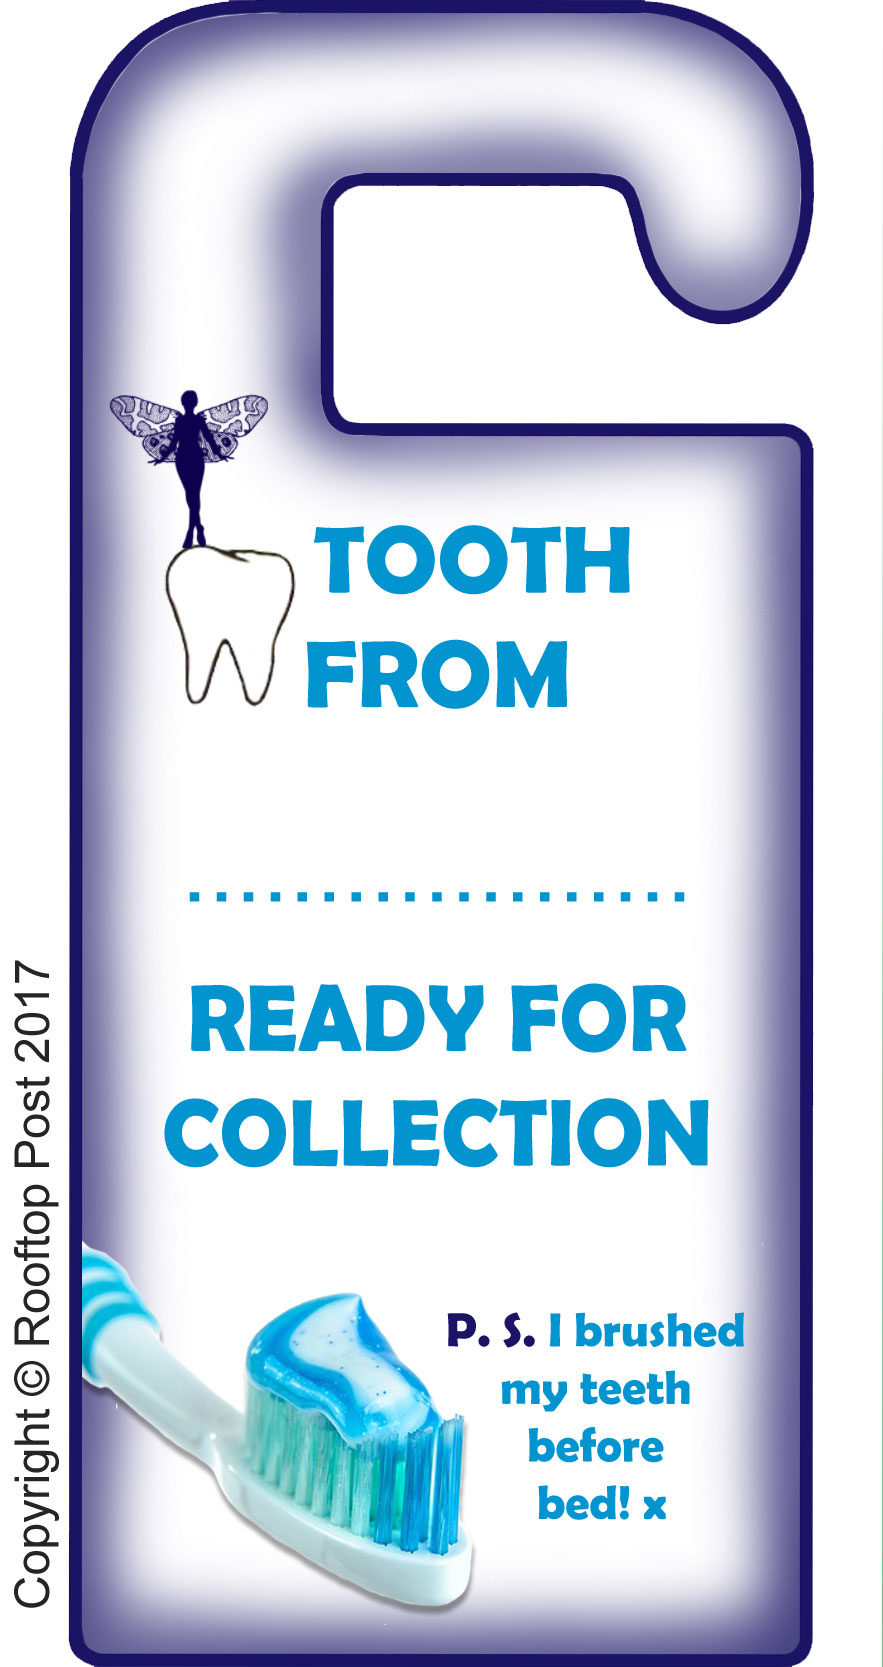 A printable door hanger from the Tooth Fairy which can be personalised by adding your child's name.